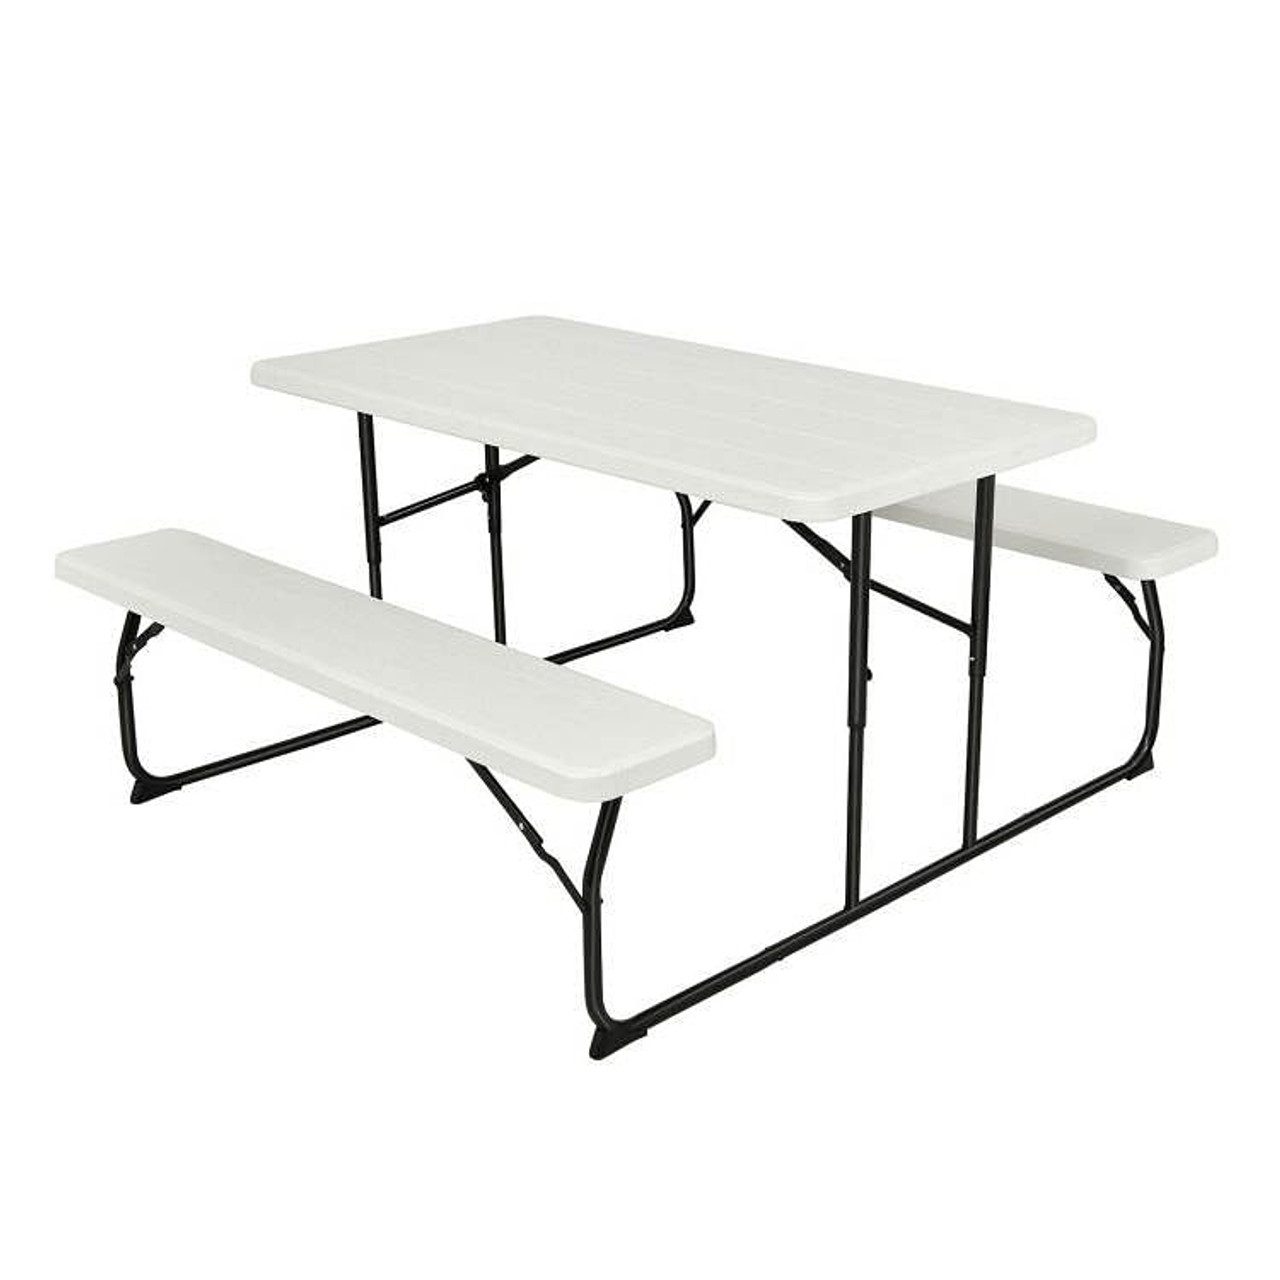 Folding White HDPE Picnic Table with 2 Benches Outdoor Patio Furniture Set